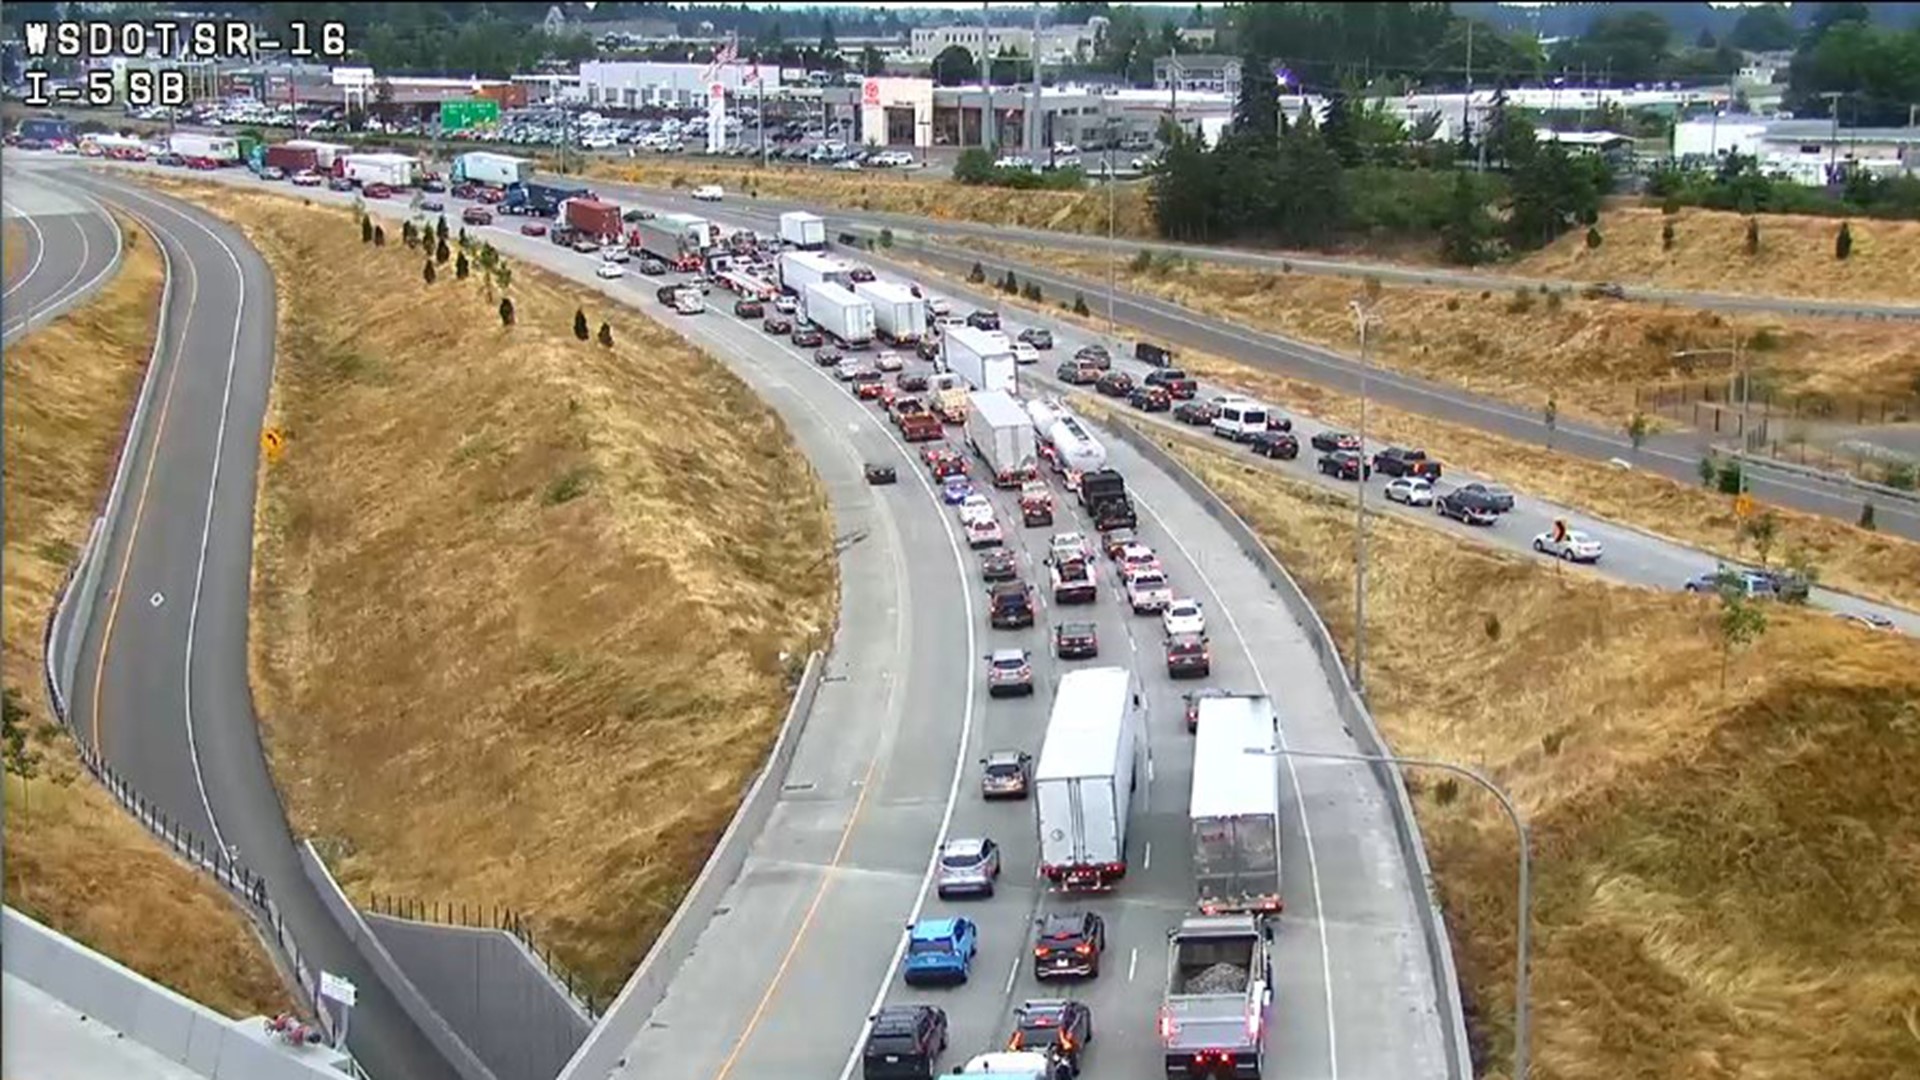 A crash involving three cars and a motorcycle blocked all southbound lanes of I-5 in Tacoma for more than six hours early Tuesday morning.